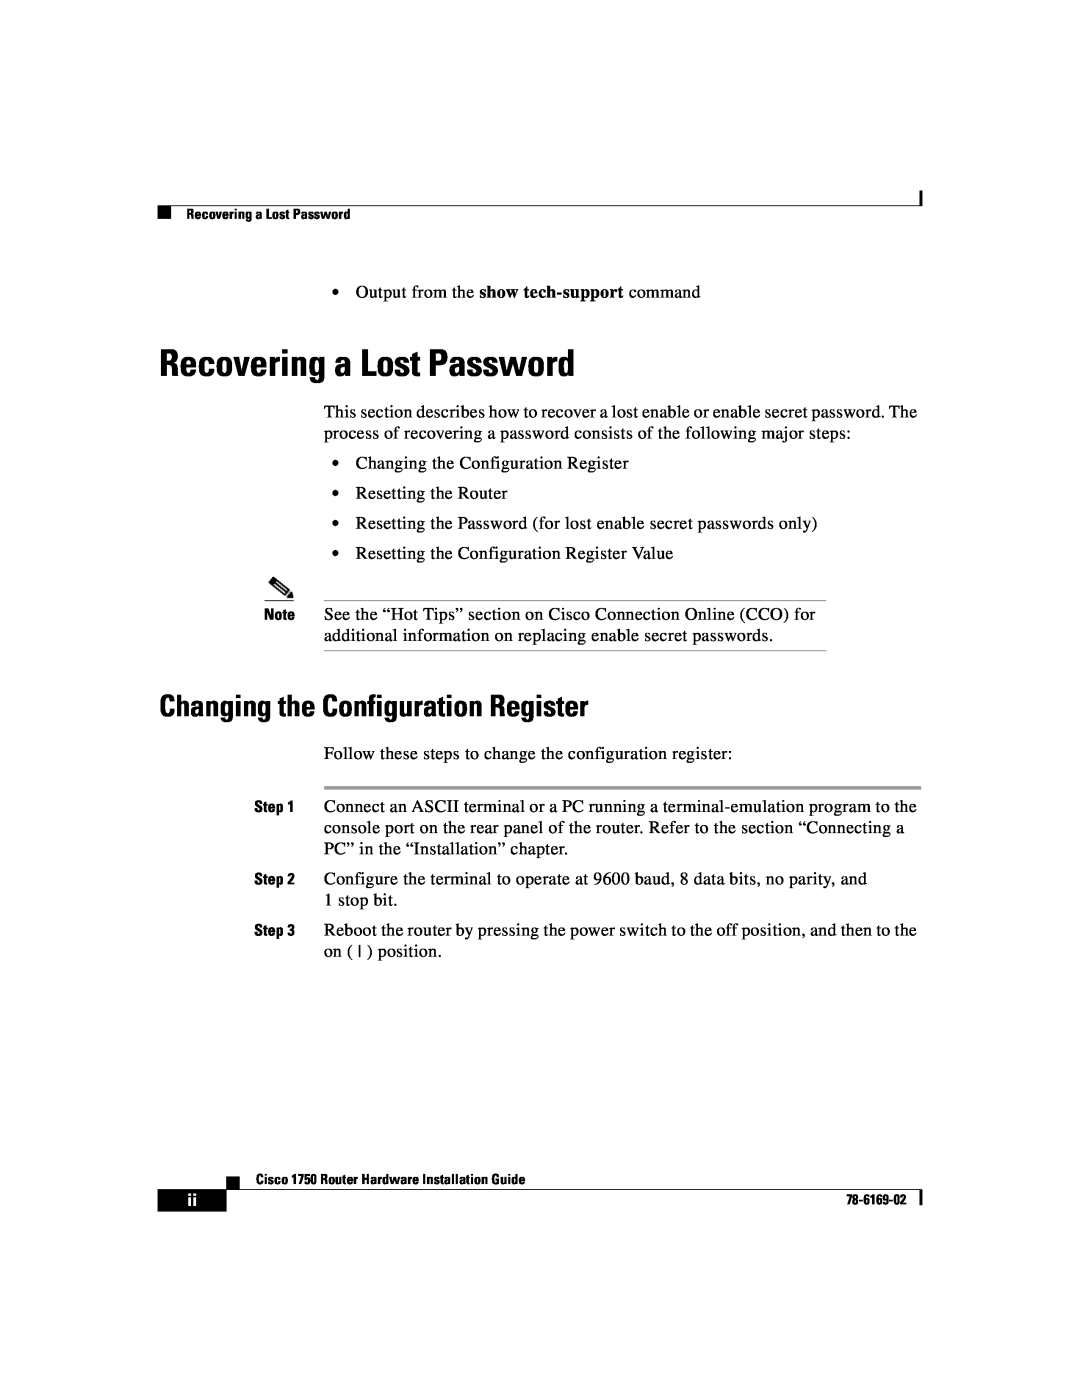 Cisco Systems CISCO1750 manual Recovering a Lost Password, Changing the Configuration Register 